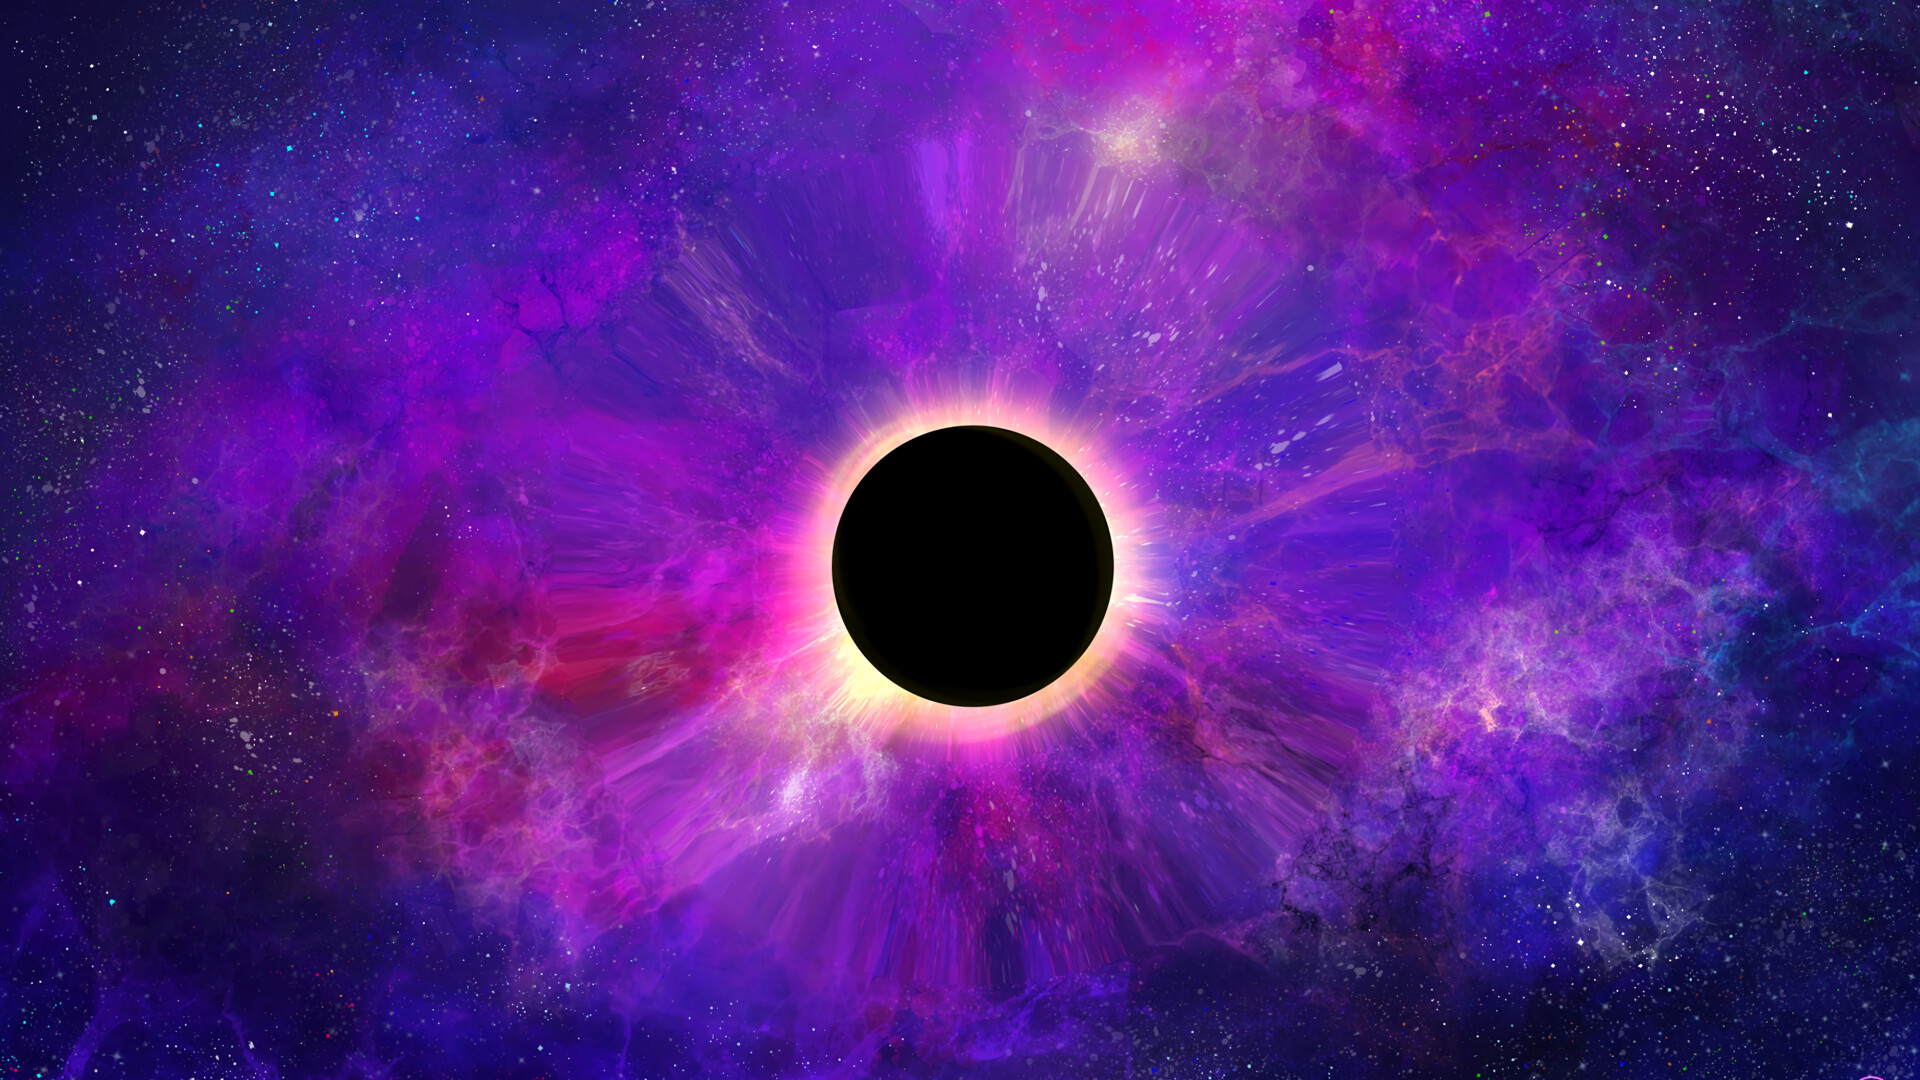 Black Hole, Colorful darkness, Mysterious planet, Cosmic art, 1920x1080 Full HD Desktop